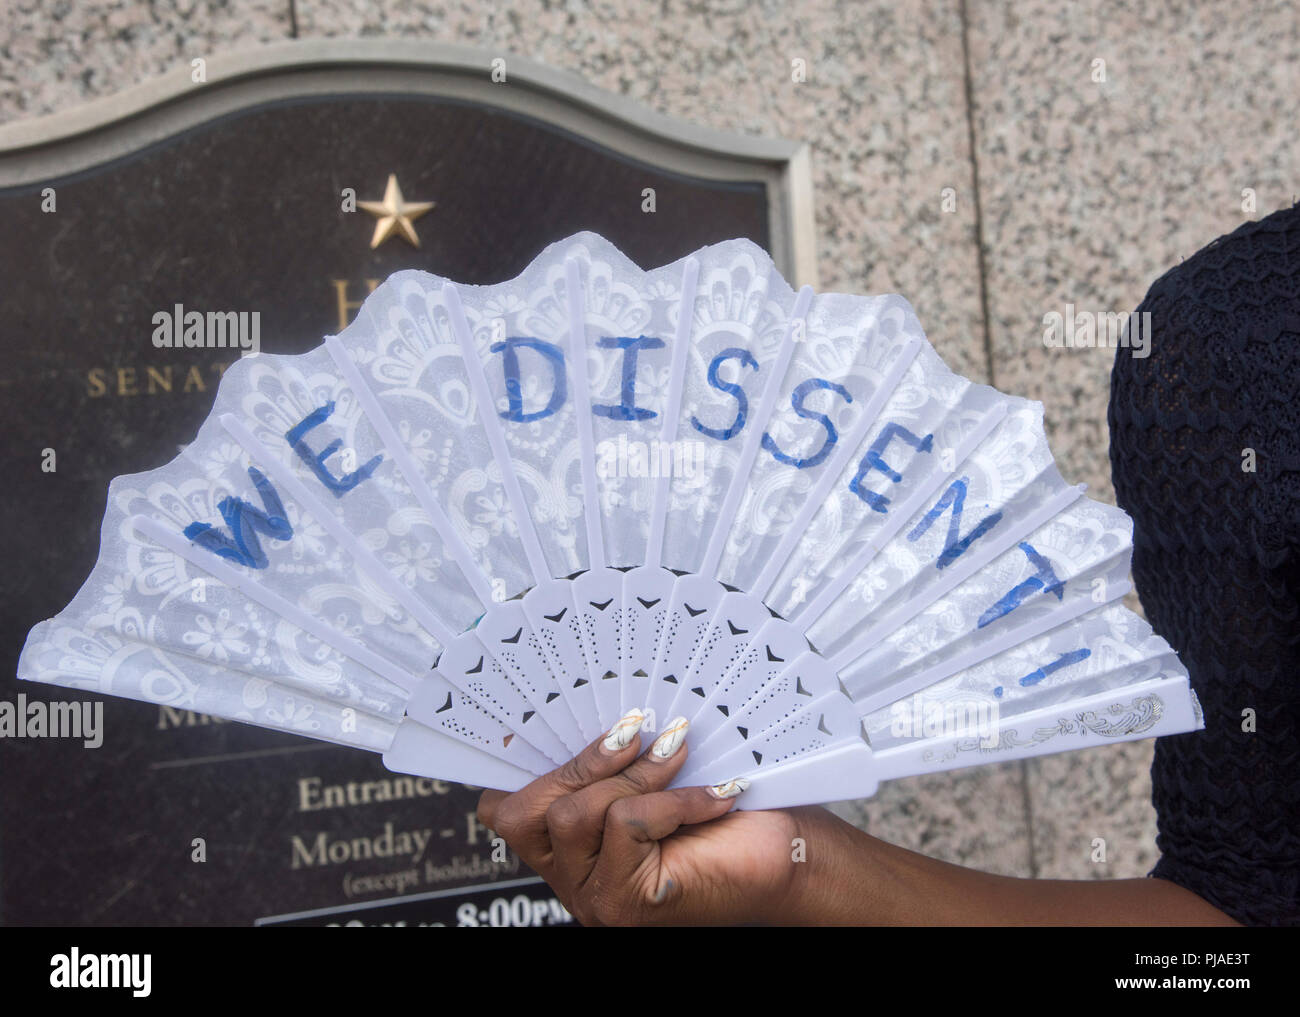 Washington DC, USA. September 5,2018, USA:  An anti Kavanaugh fan is displayed near where Judge Brett Kavanaugh attends his confirmation hearing to become the next Supreme Court Justice on Capitol Hill in Washington DC.   Patsy Lynch/Alamy Credit: Patsy Lynch/Alamy Live News Stock Photo